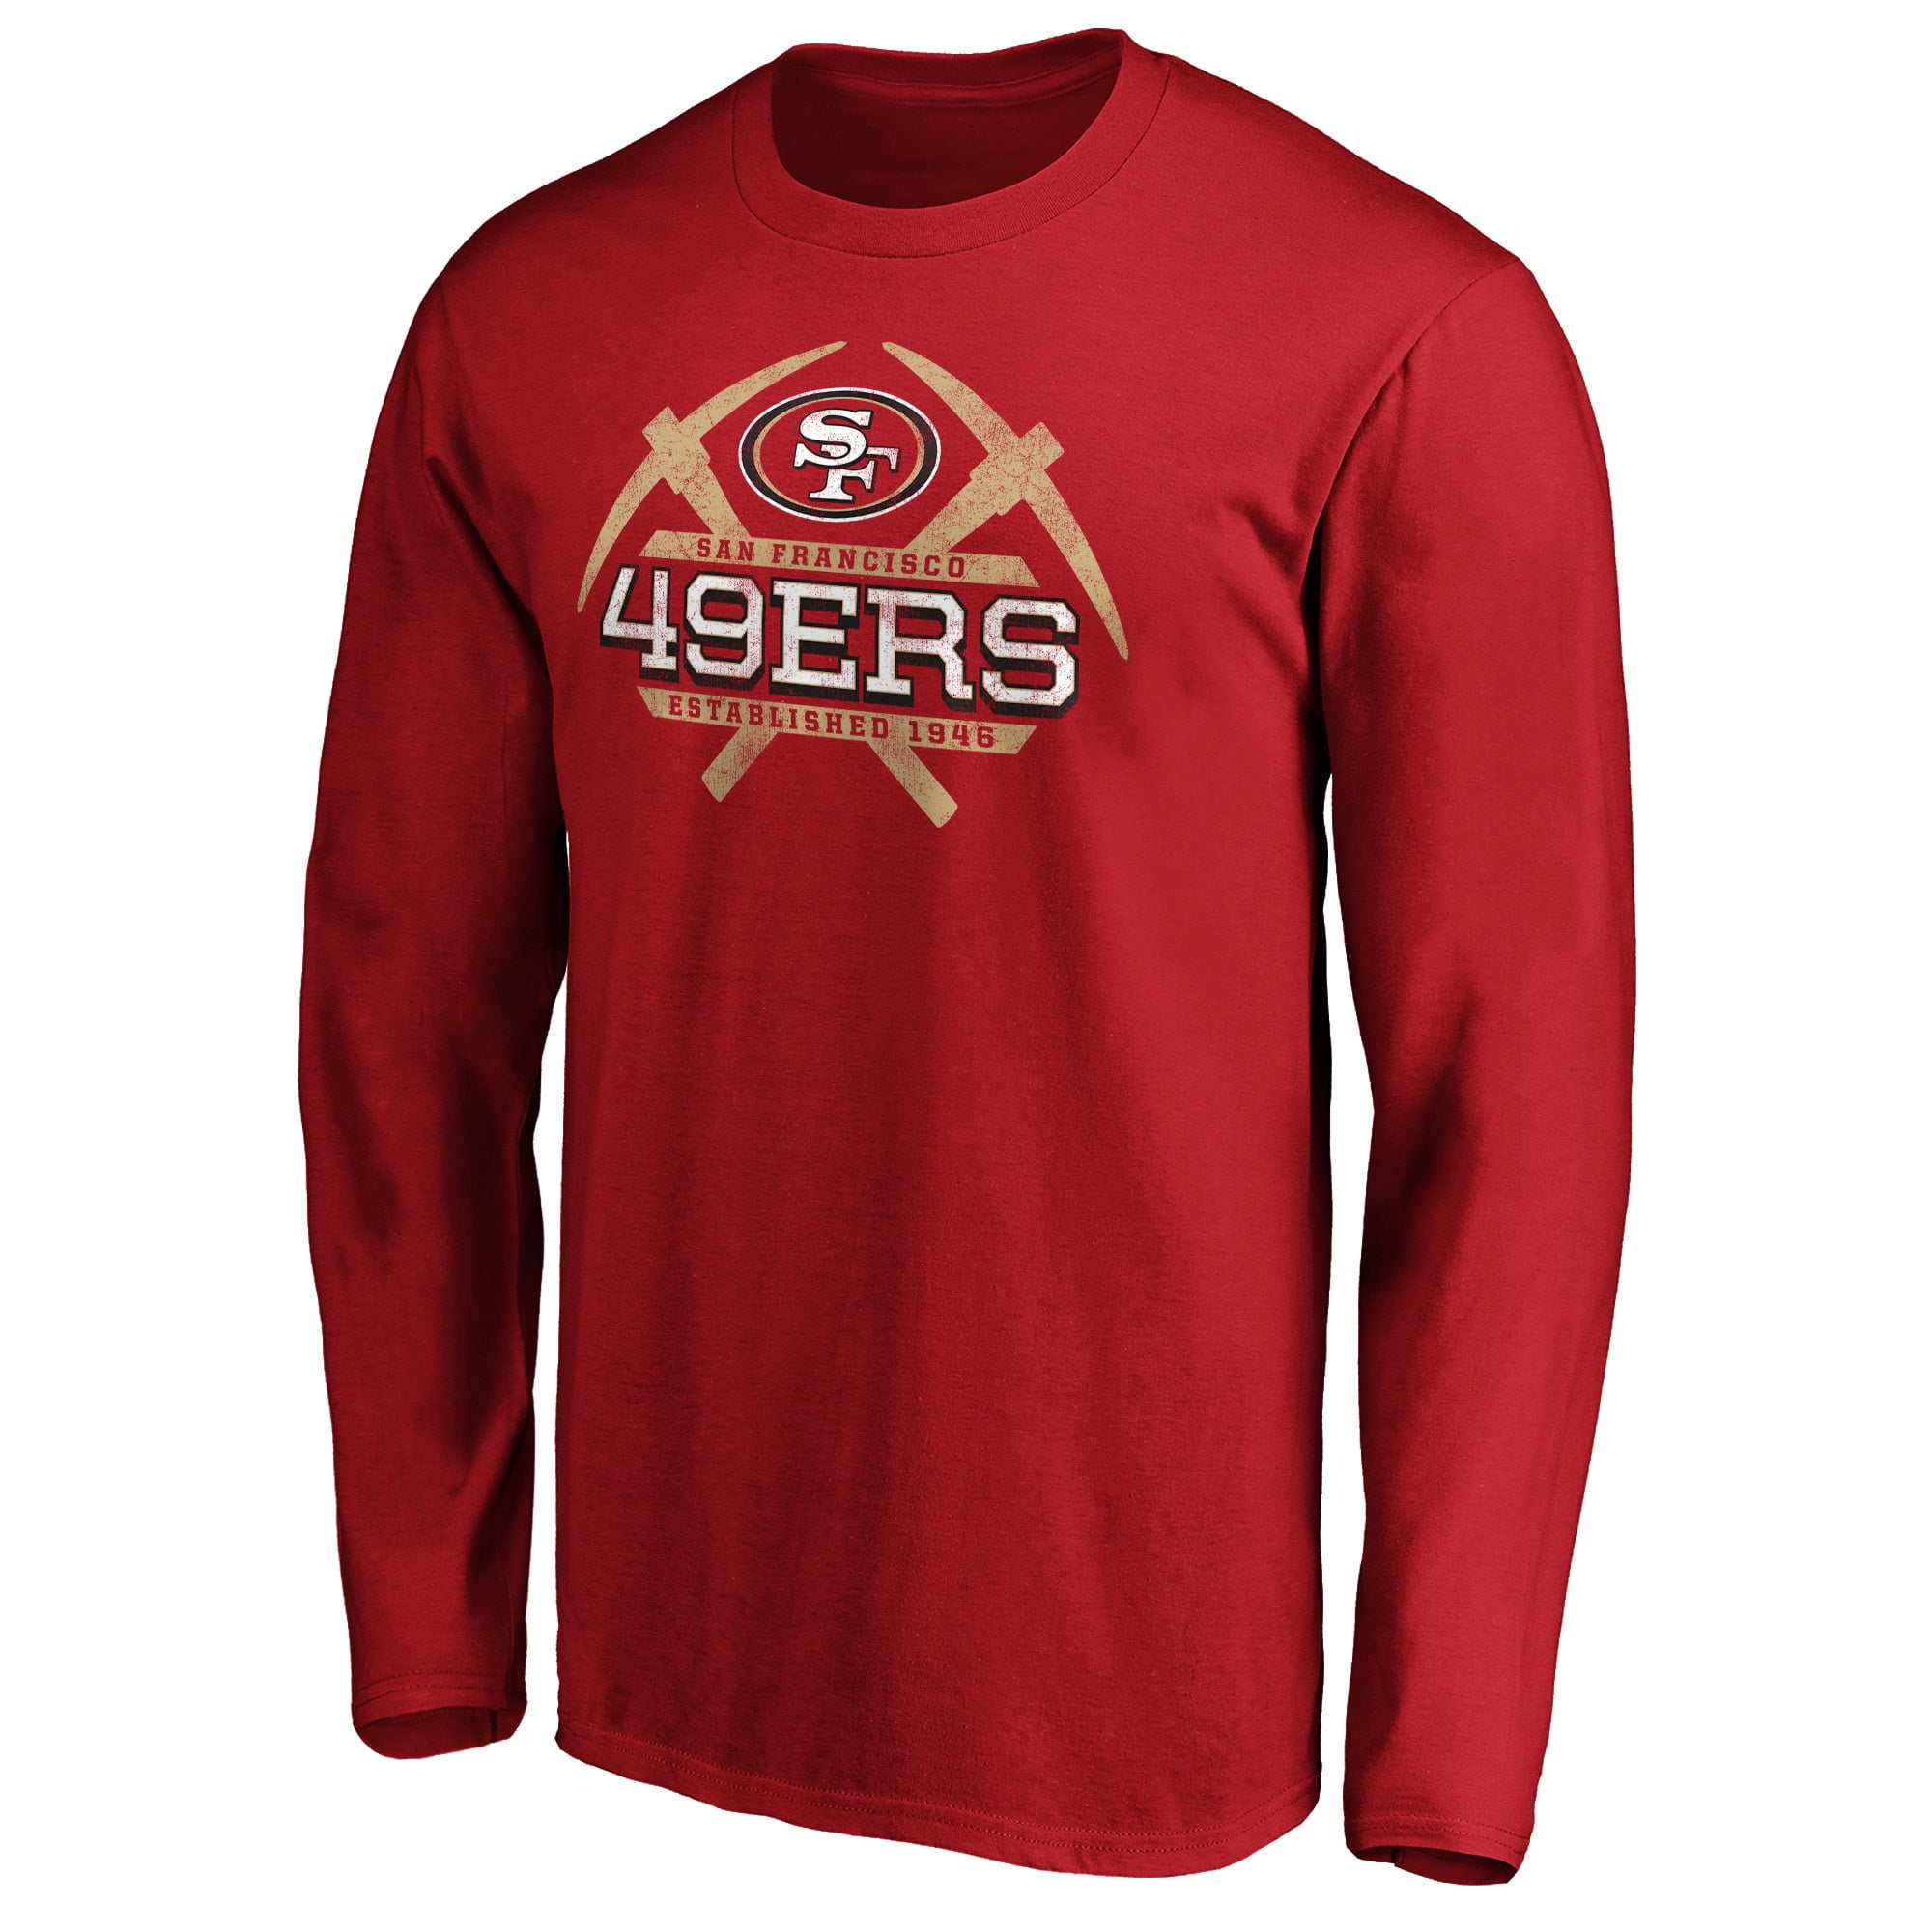 red and gold 49ers jersey